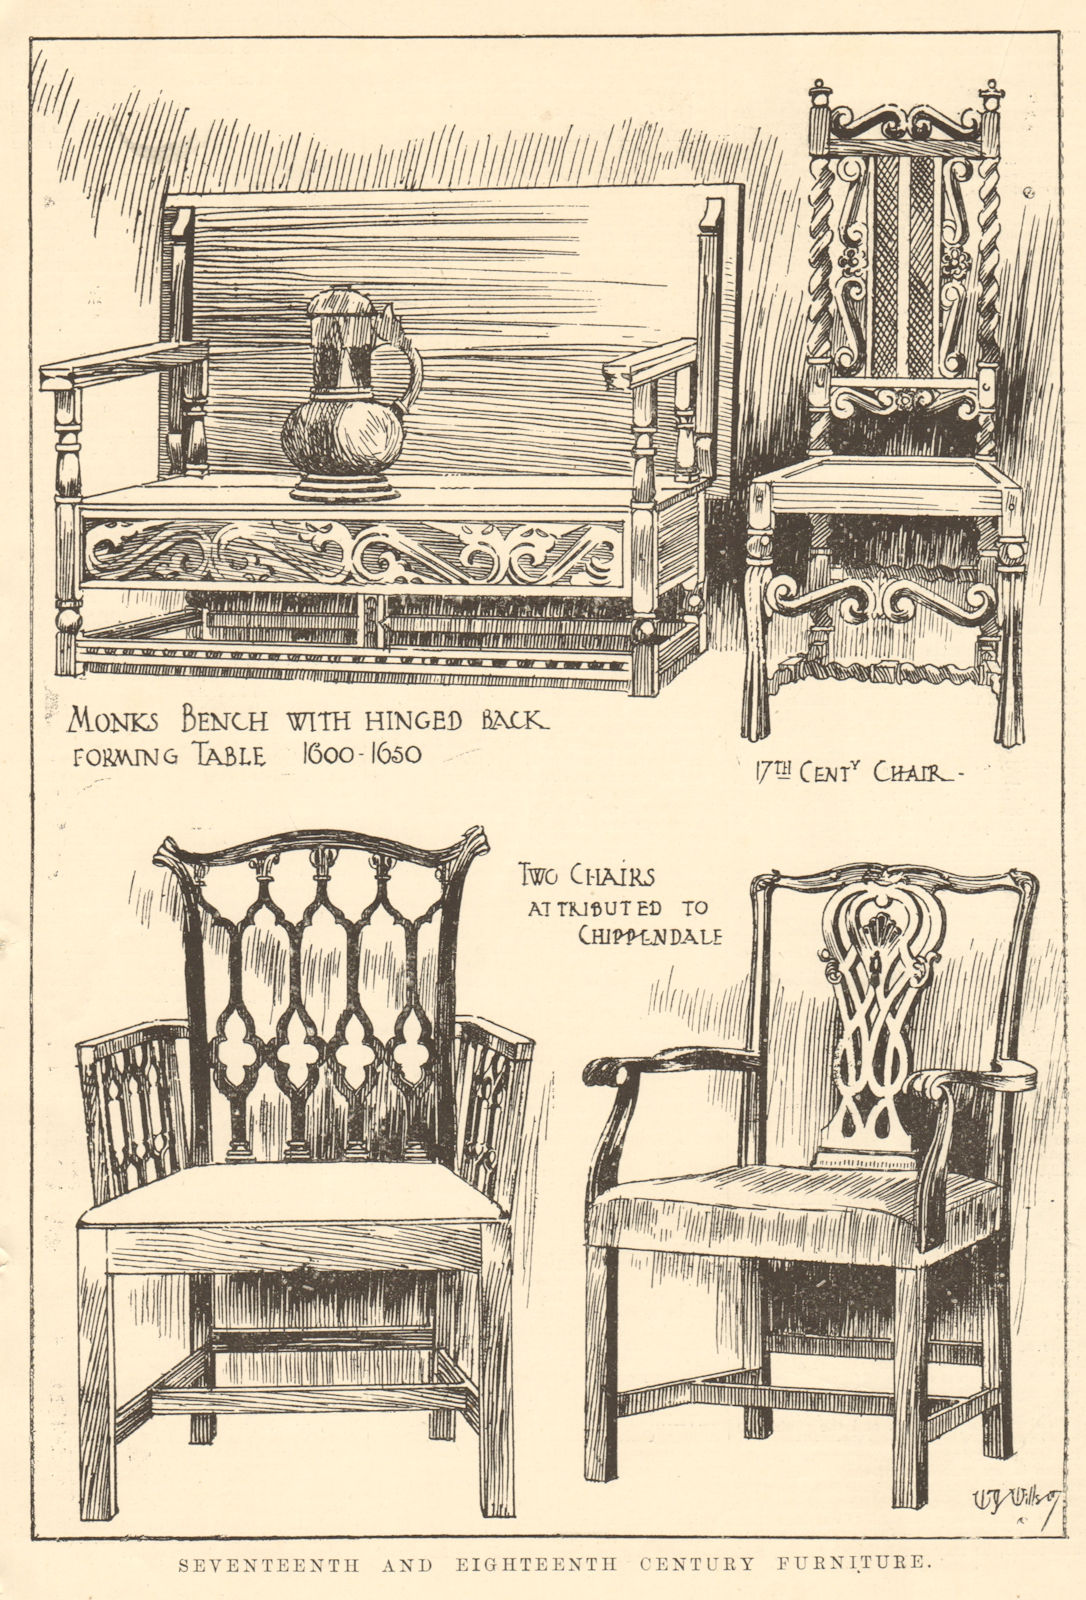 17C 18C furniture. Monks bench hinged back table. Chippendale chair 1907 print